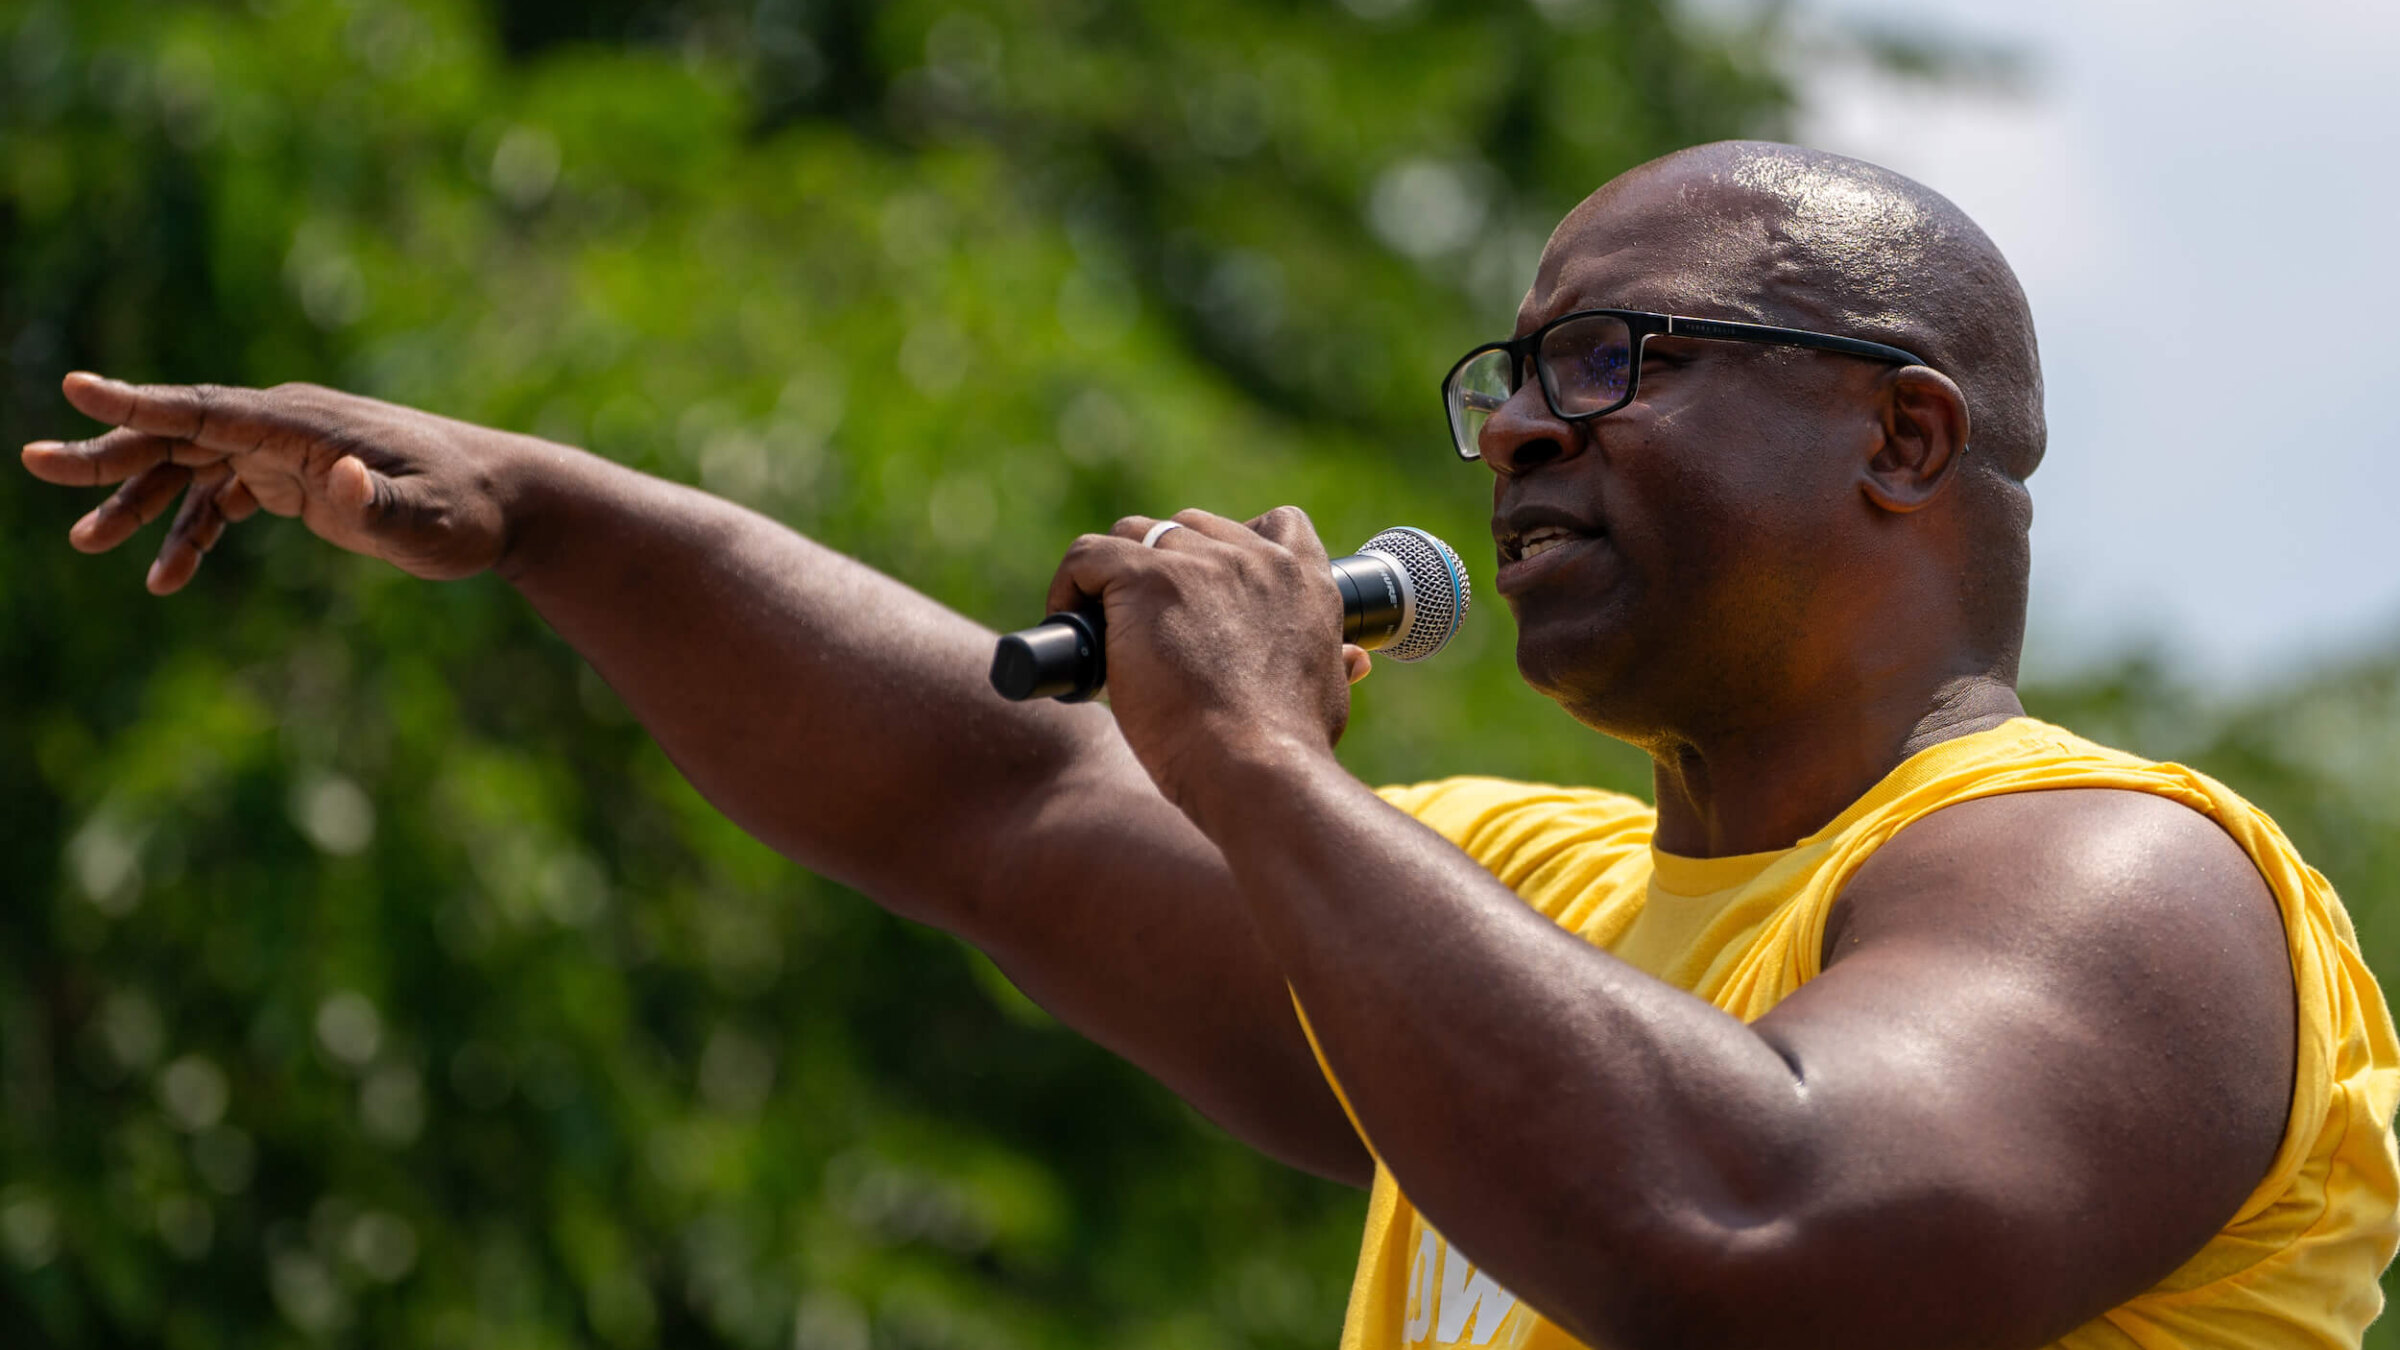 Rep. Jamaal Bowman (D-NY) speaks during a rally at St. Mary's Park in the Bronx on June 22, in the face of protests by pro-Palestinian group Within Our Lifetime. 